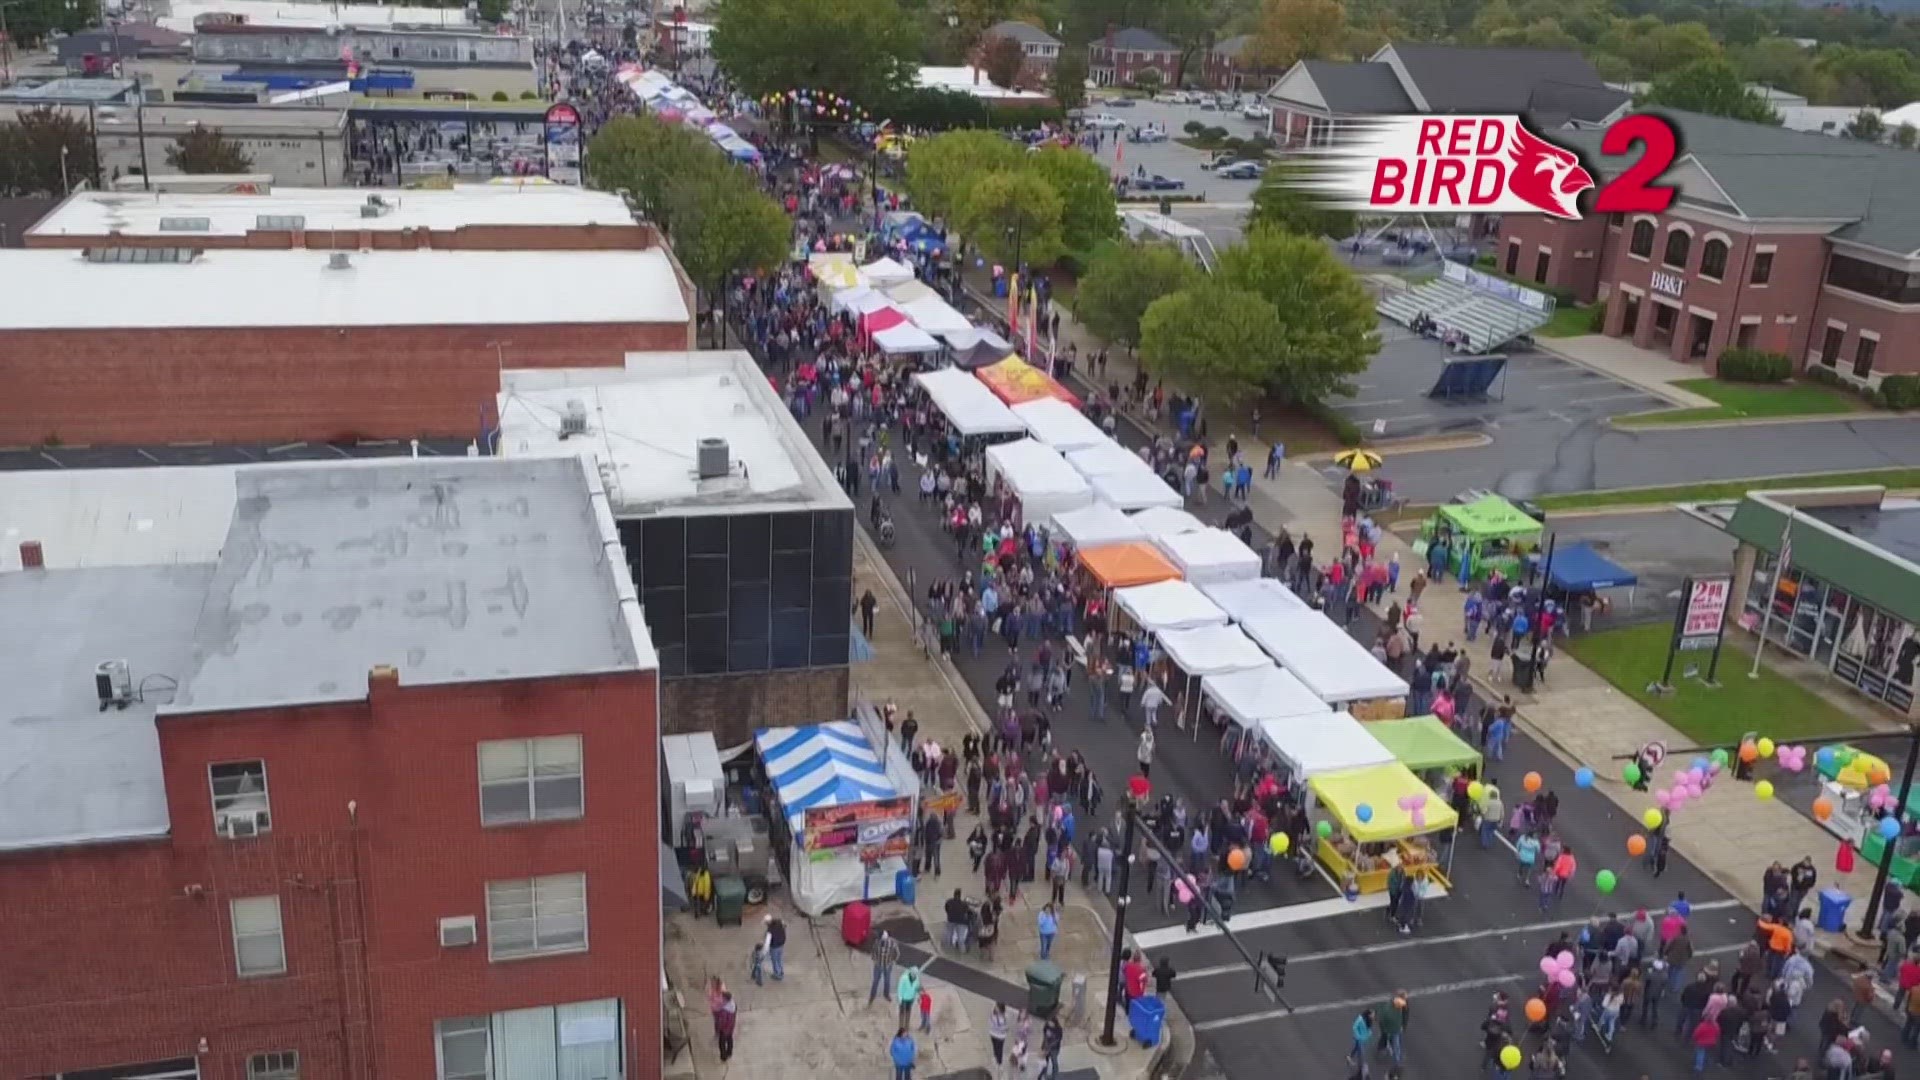 About 200,000 people are expected to head to Lexington for the barbecue festival Saturday.